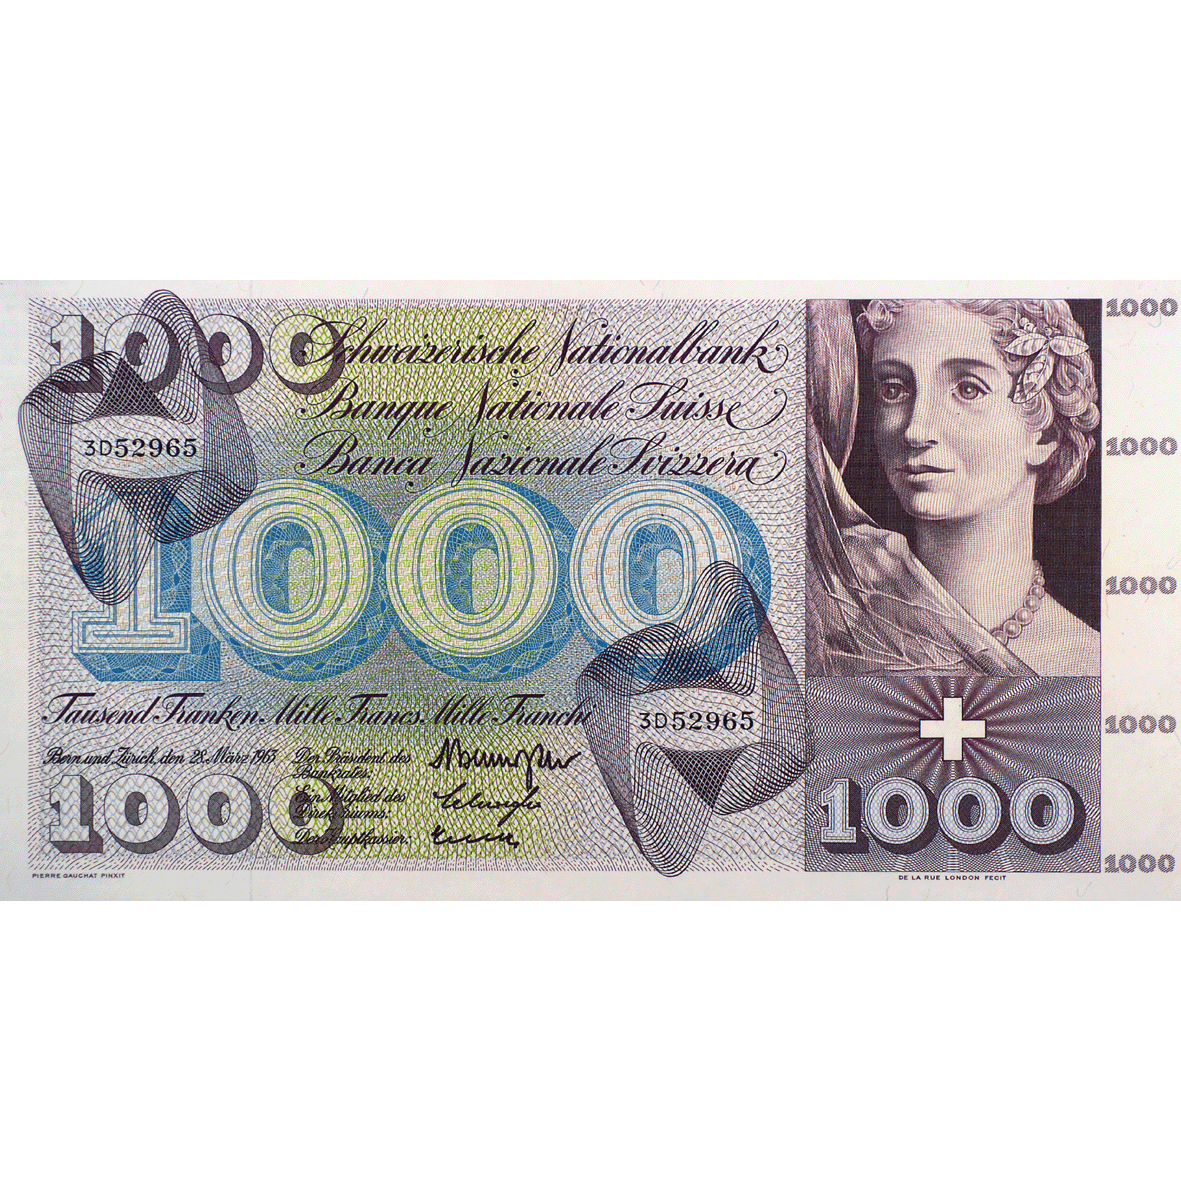 Swiss Confederation, 1,000 Francs (5th Banknote Series, in Circulation 1956-1980) (obverse)